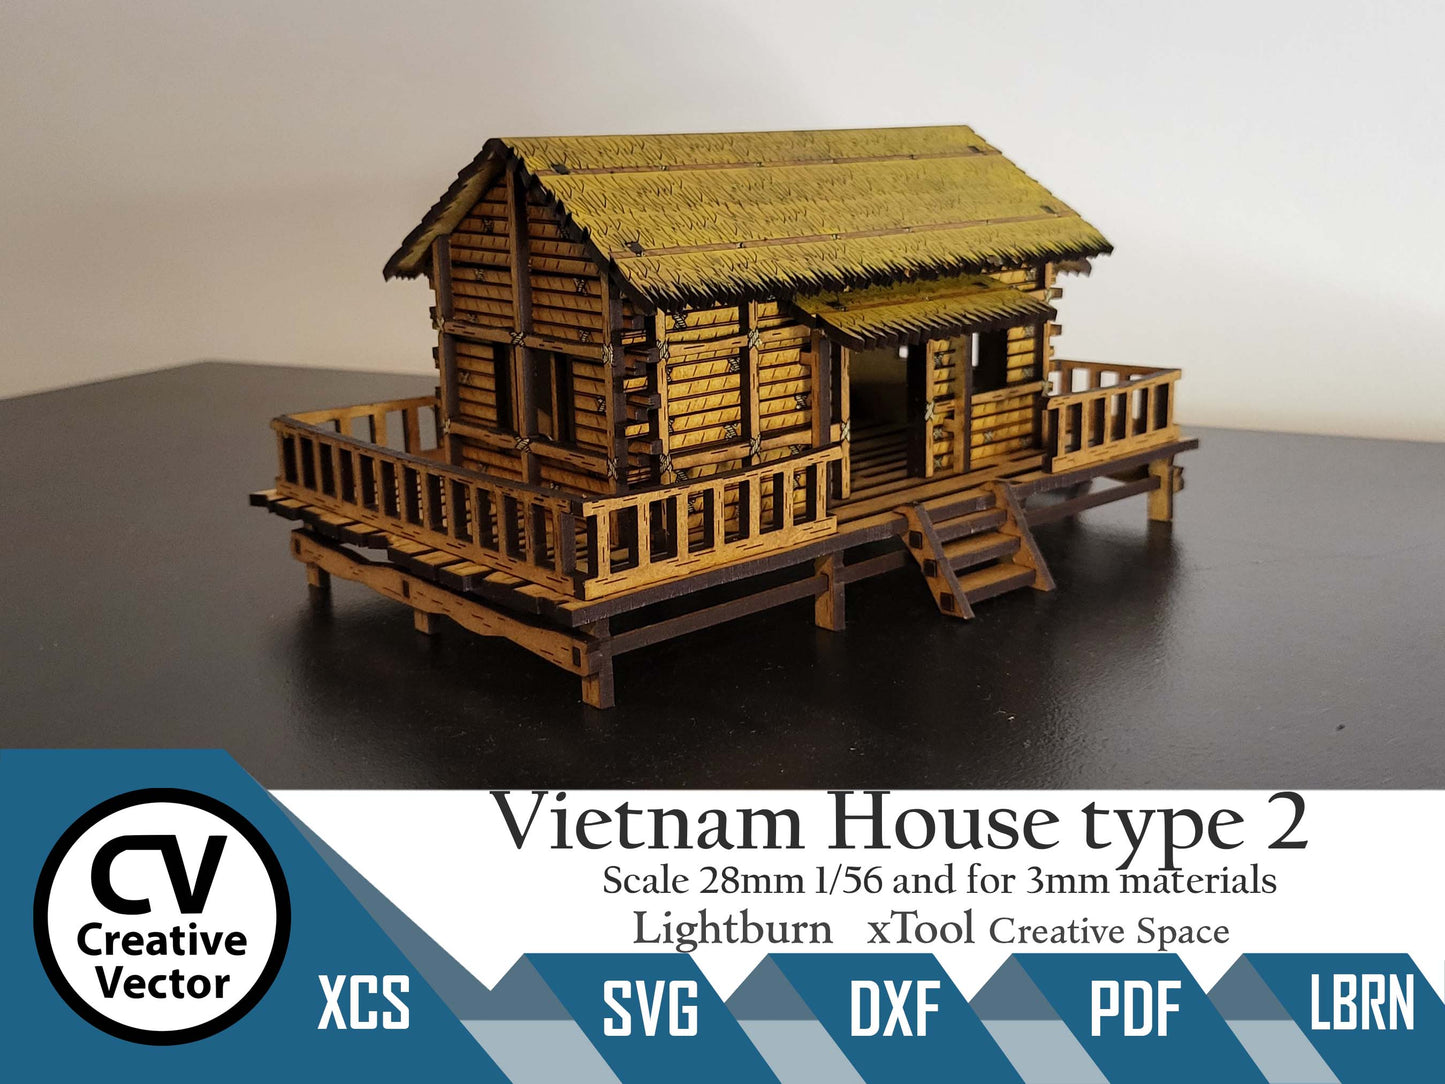 Vietnam House type 2 in scale 28 mm